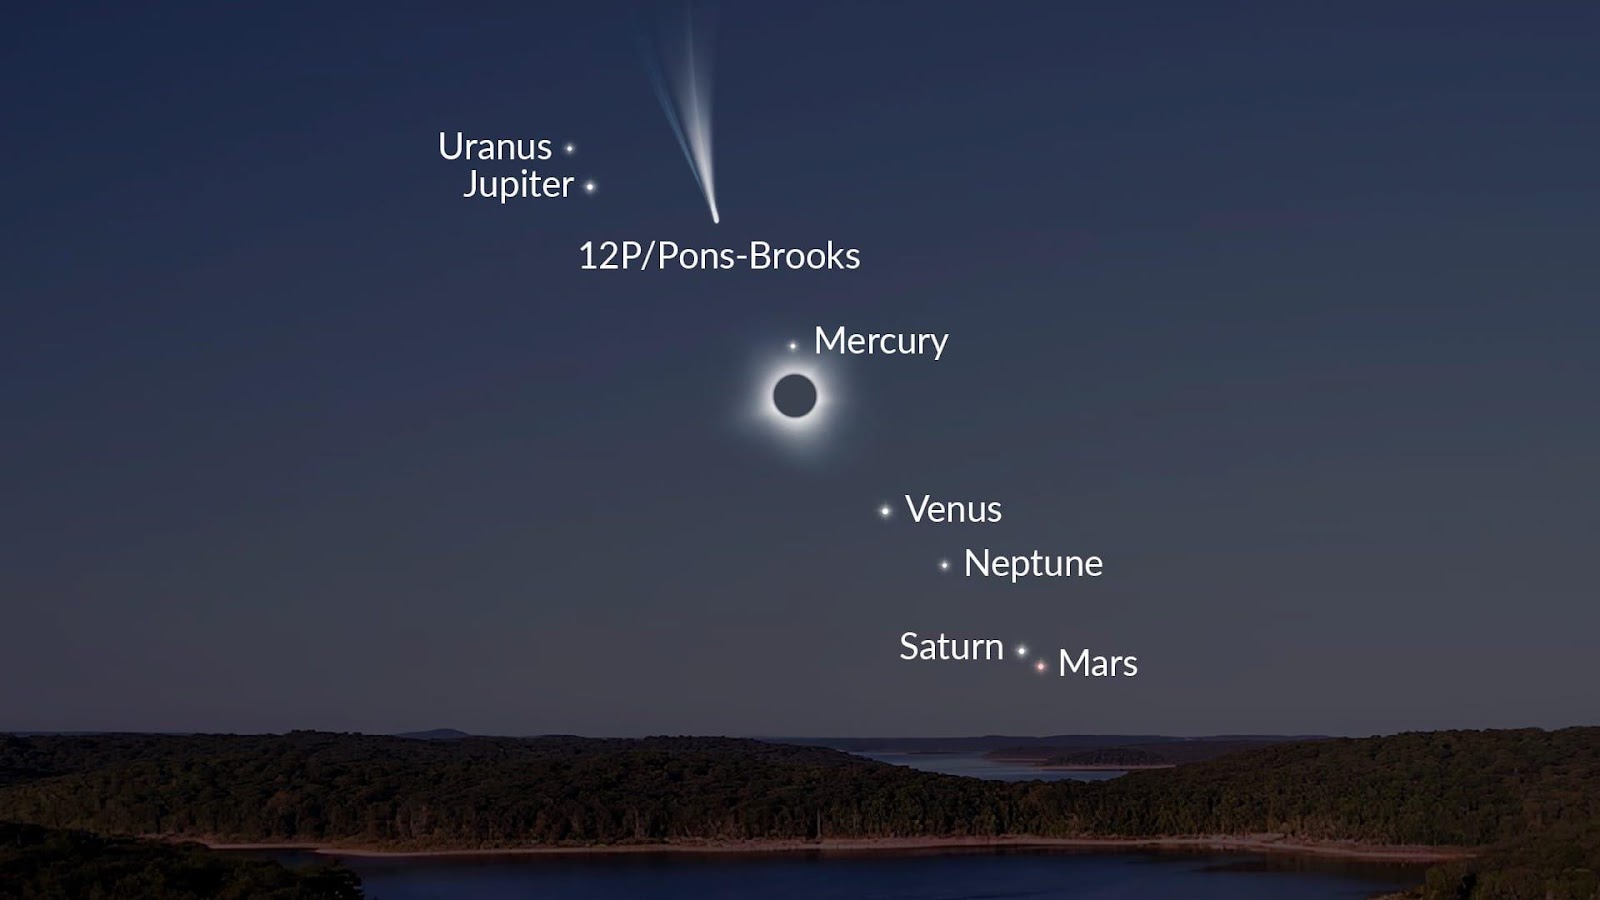 April 8: planetary alignment during the total solar eclipse